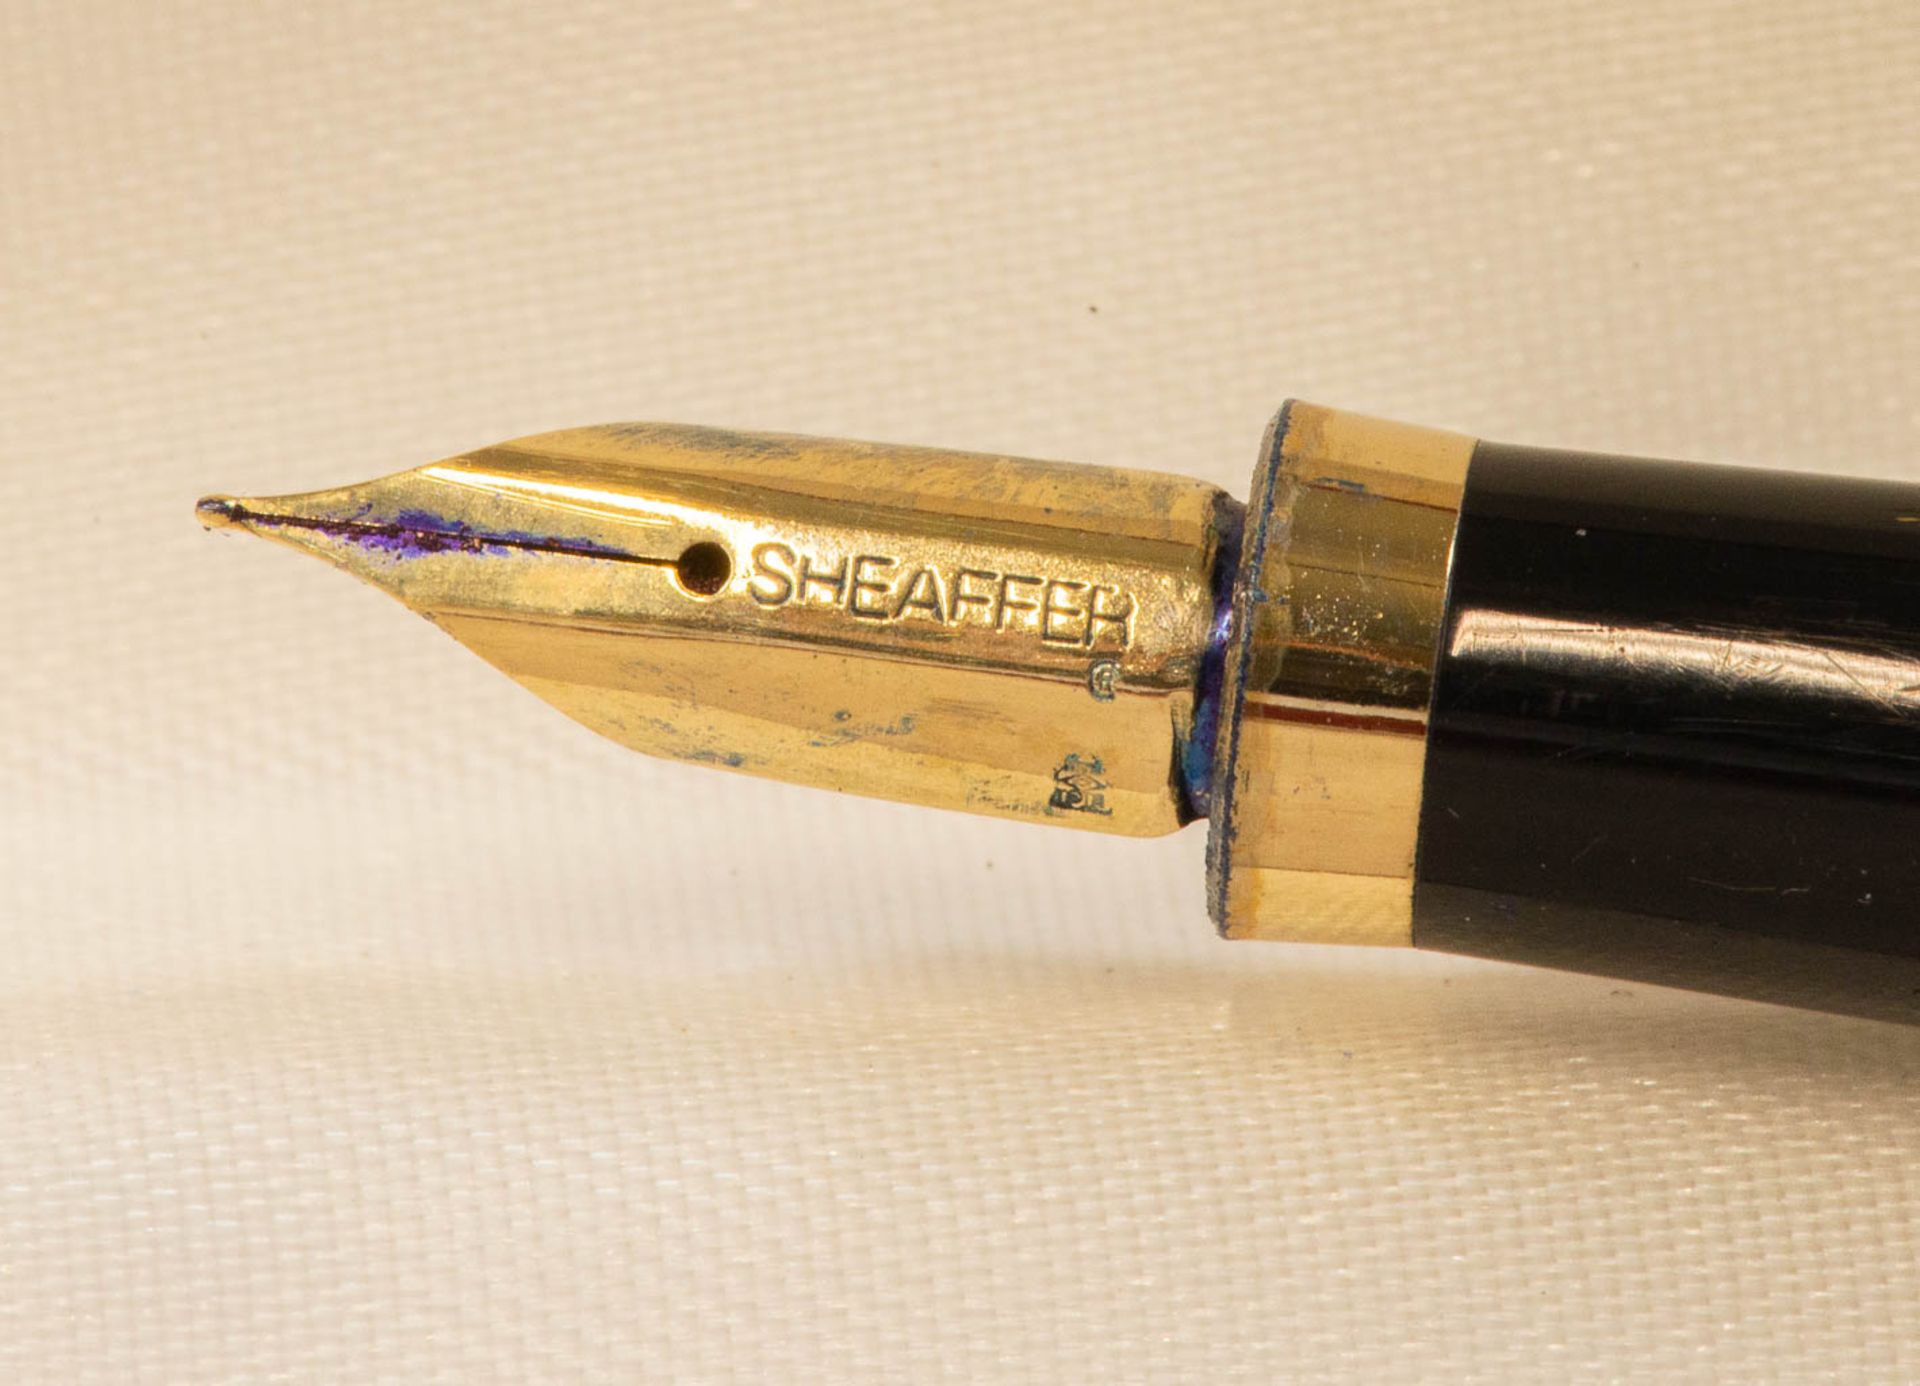 A Sheaffer fountain pen with 18kg gold nib, and a ballpoint pen in their original case. - Image 11 of 11